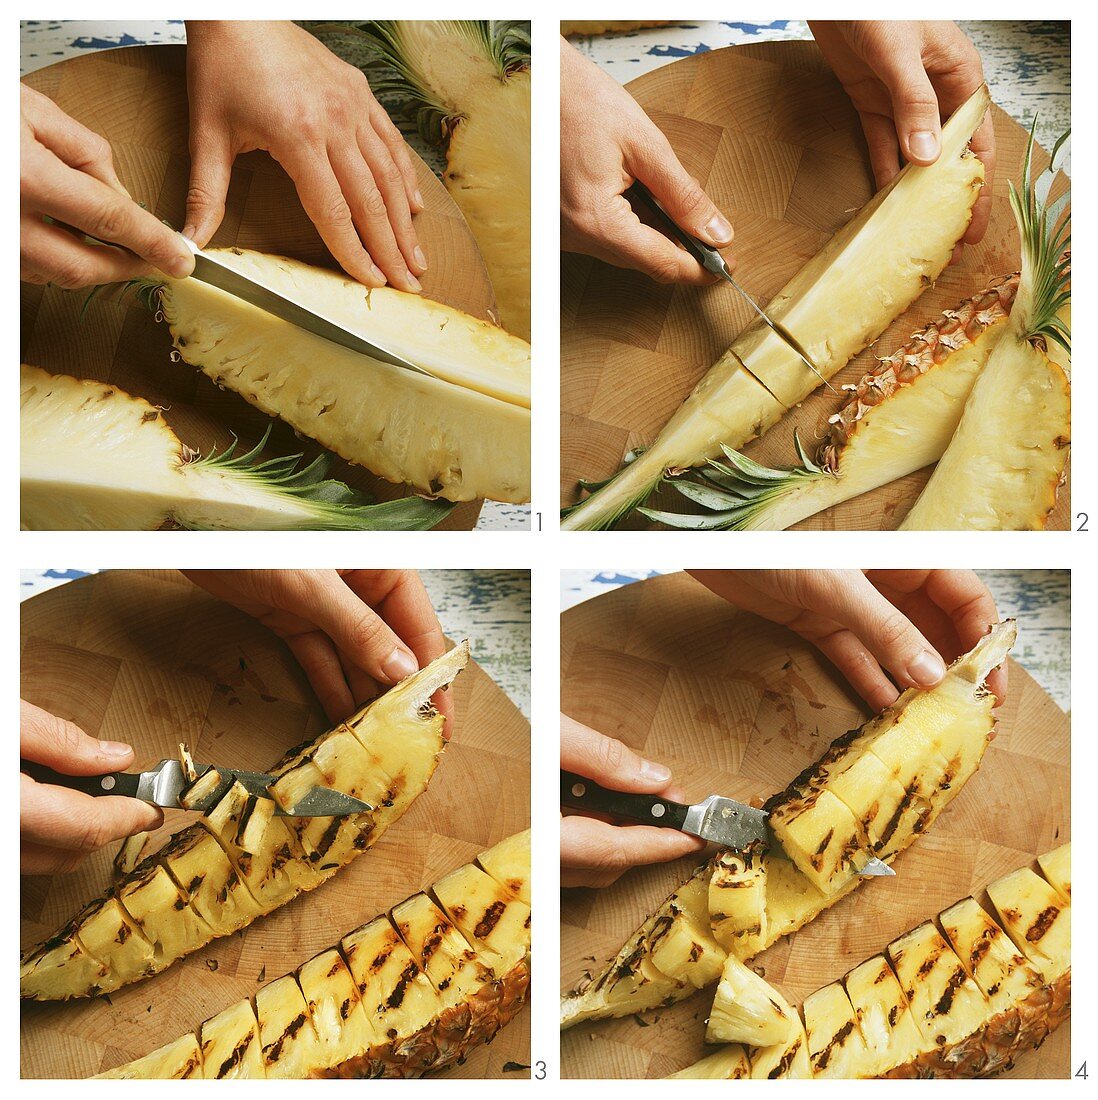 Slicing and grilling pineapple